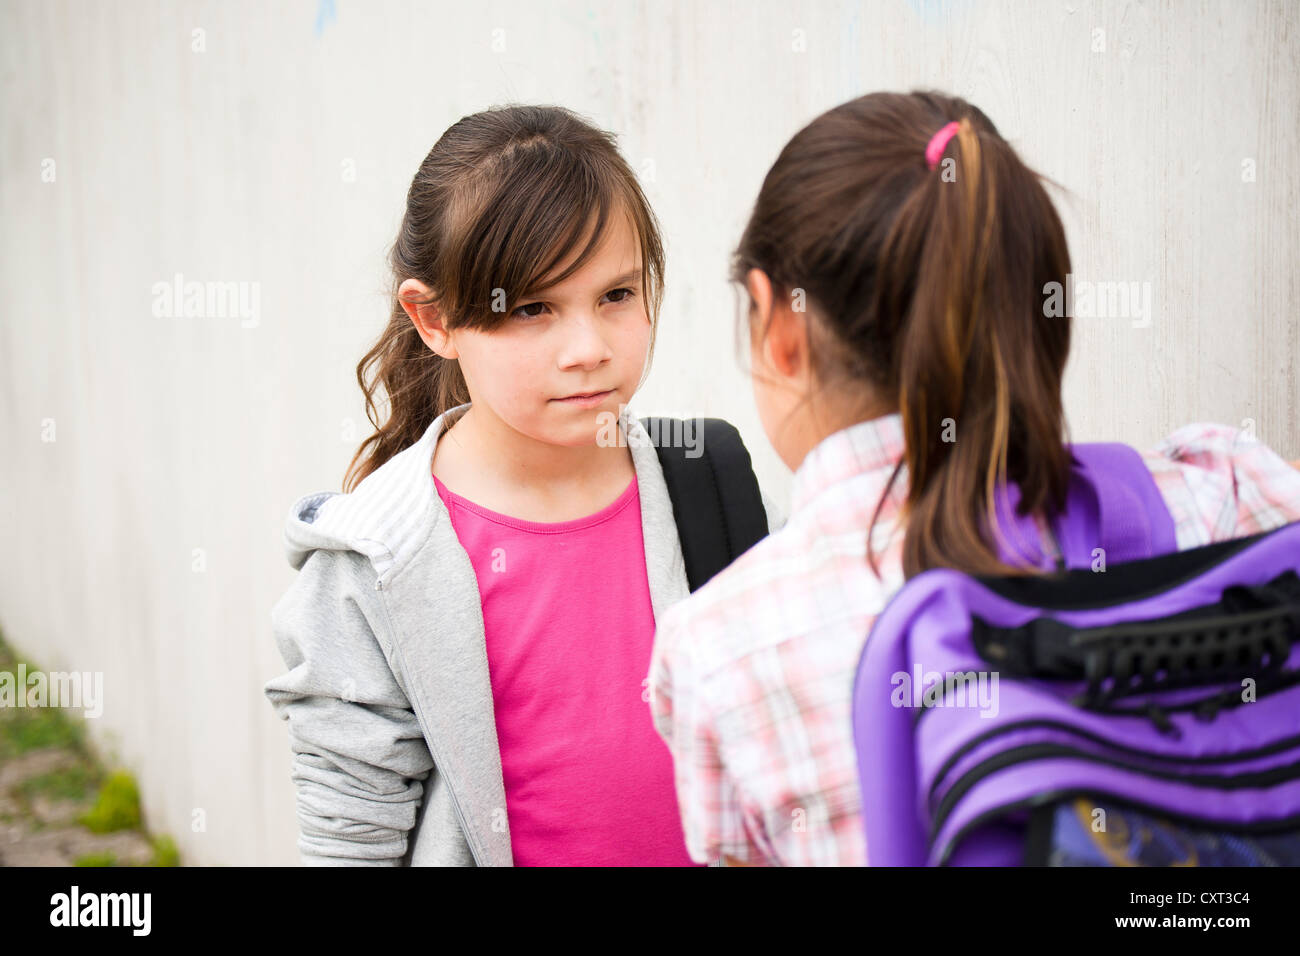 Two girls looking agressively at each other Stock Photo